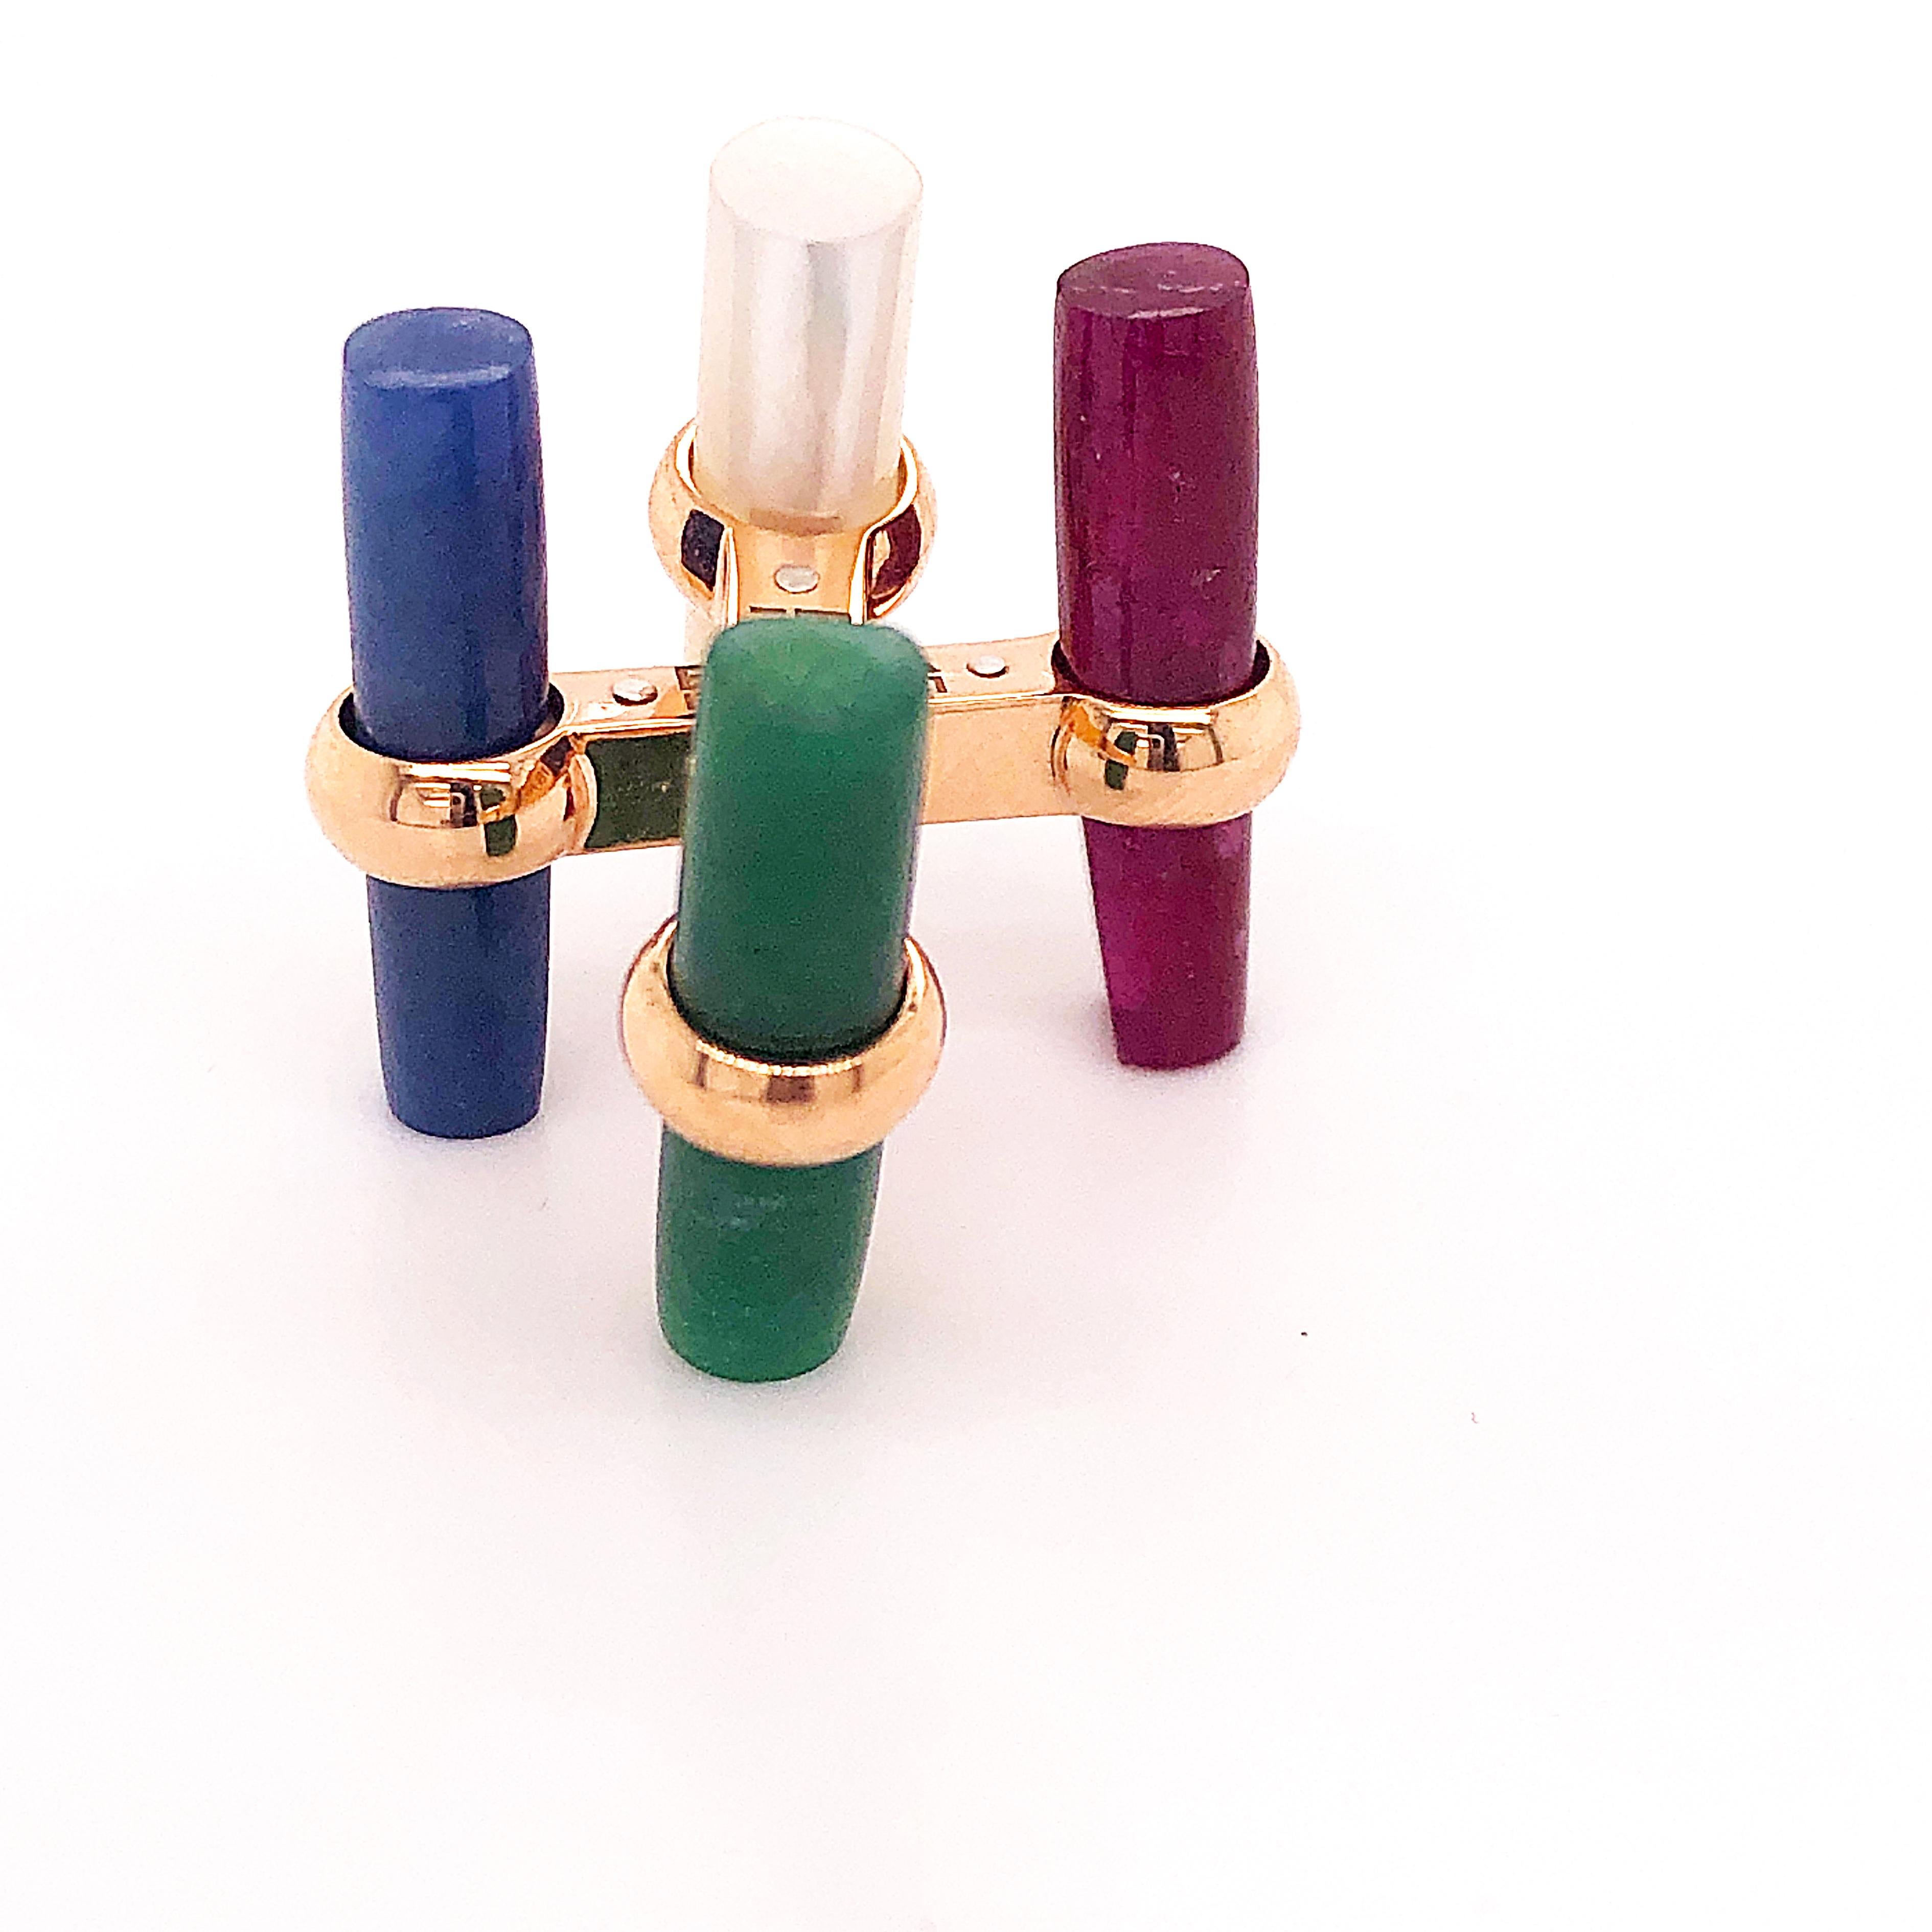 One-of-a-kind, Interchangeable Natural Precious Stones Set Cufflinks featuring 24.13 Kt Natural Blue Sapphire, 24.67Kt Ruby, 16.78Kt Green Jade, 14.5Kt White Moonstone Hand Inlaid Batons in an 18K Rose Gold Setting; a fitted Burgundy Leather Case